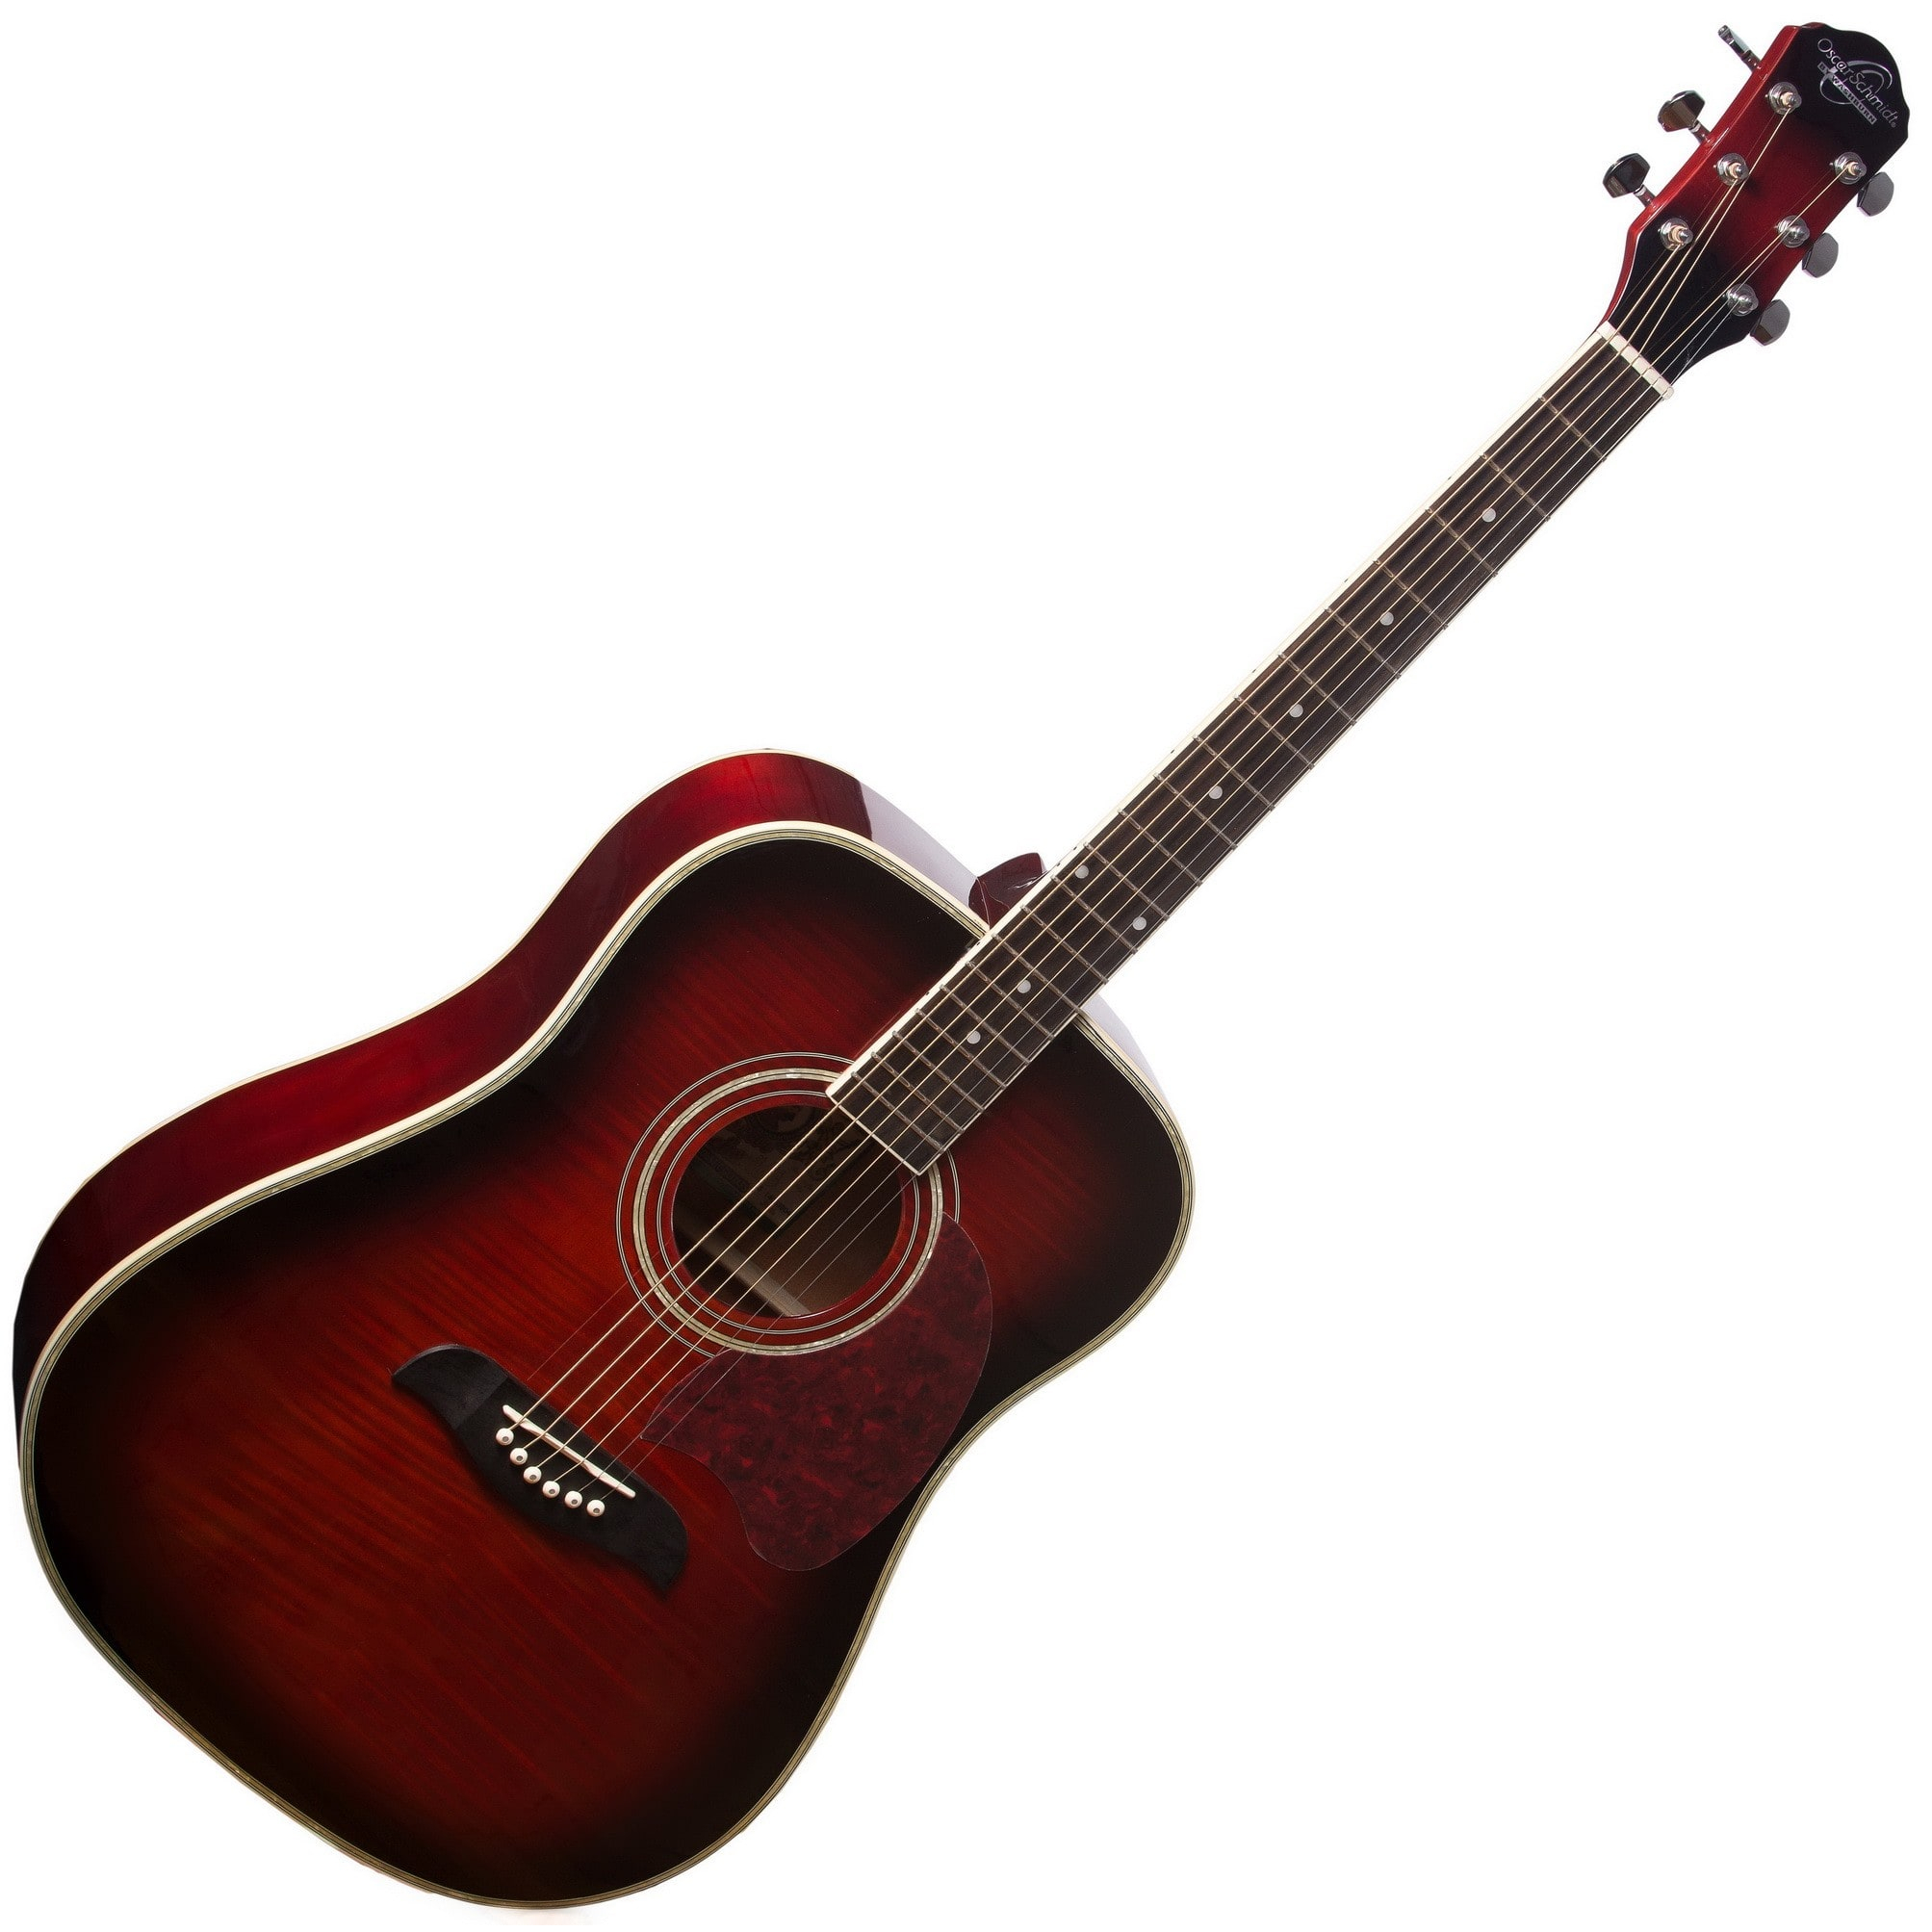 Stagg SA35 A-BK Acoustic Guitar Review 2022